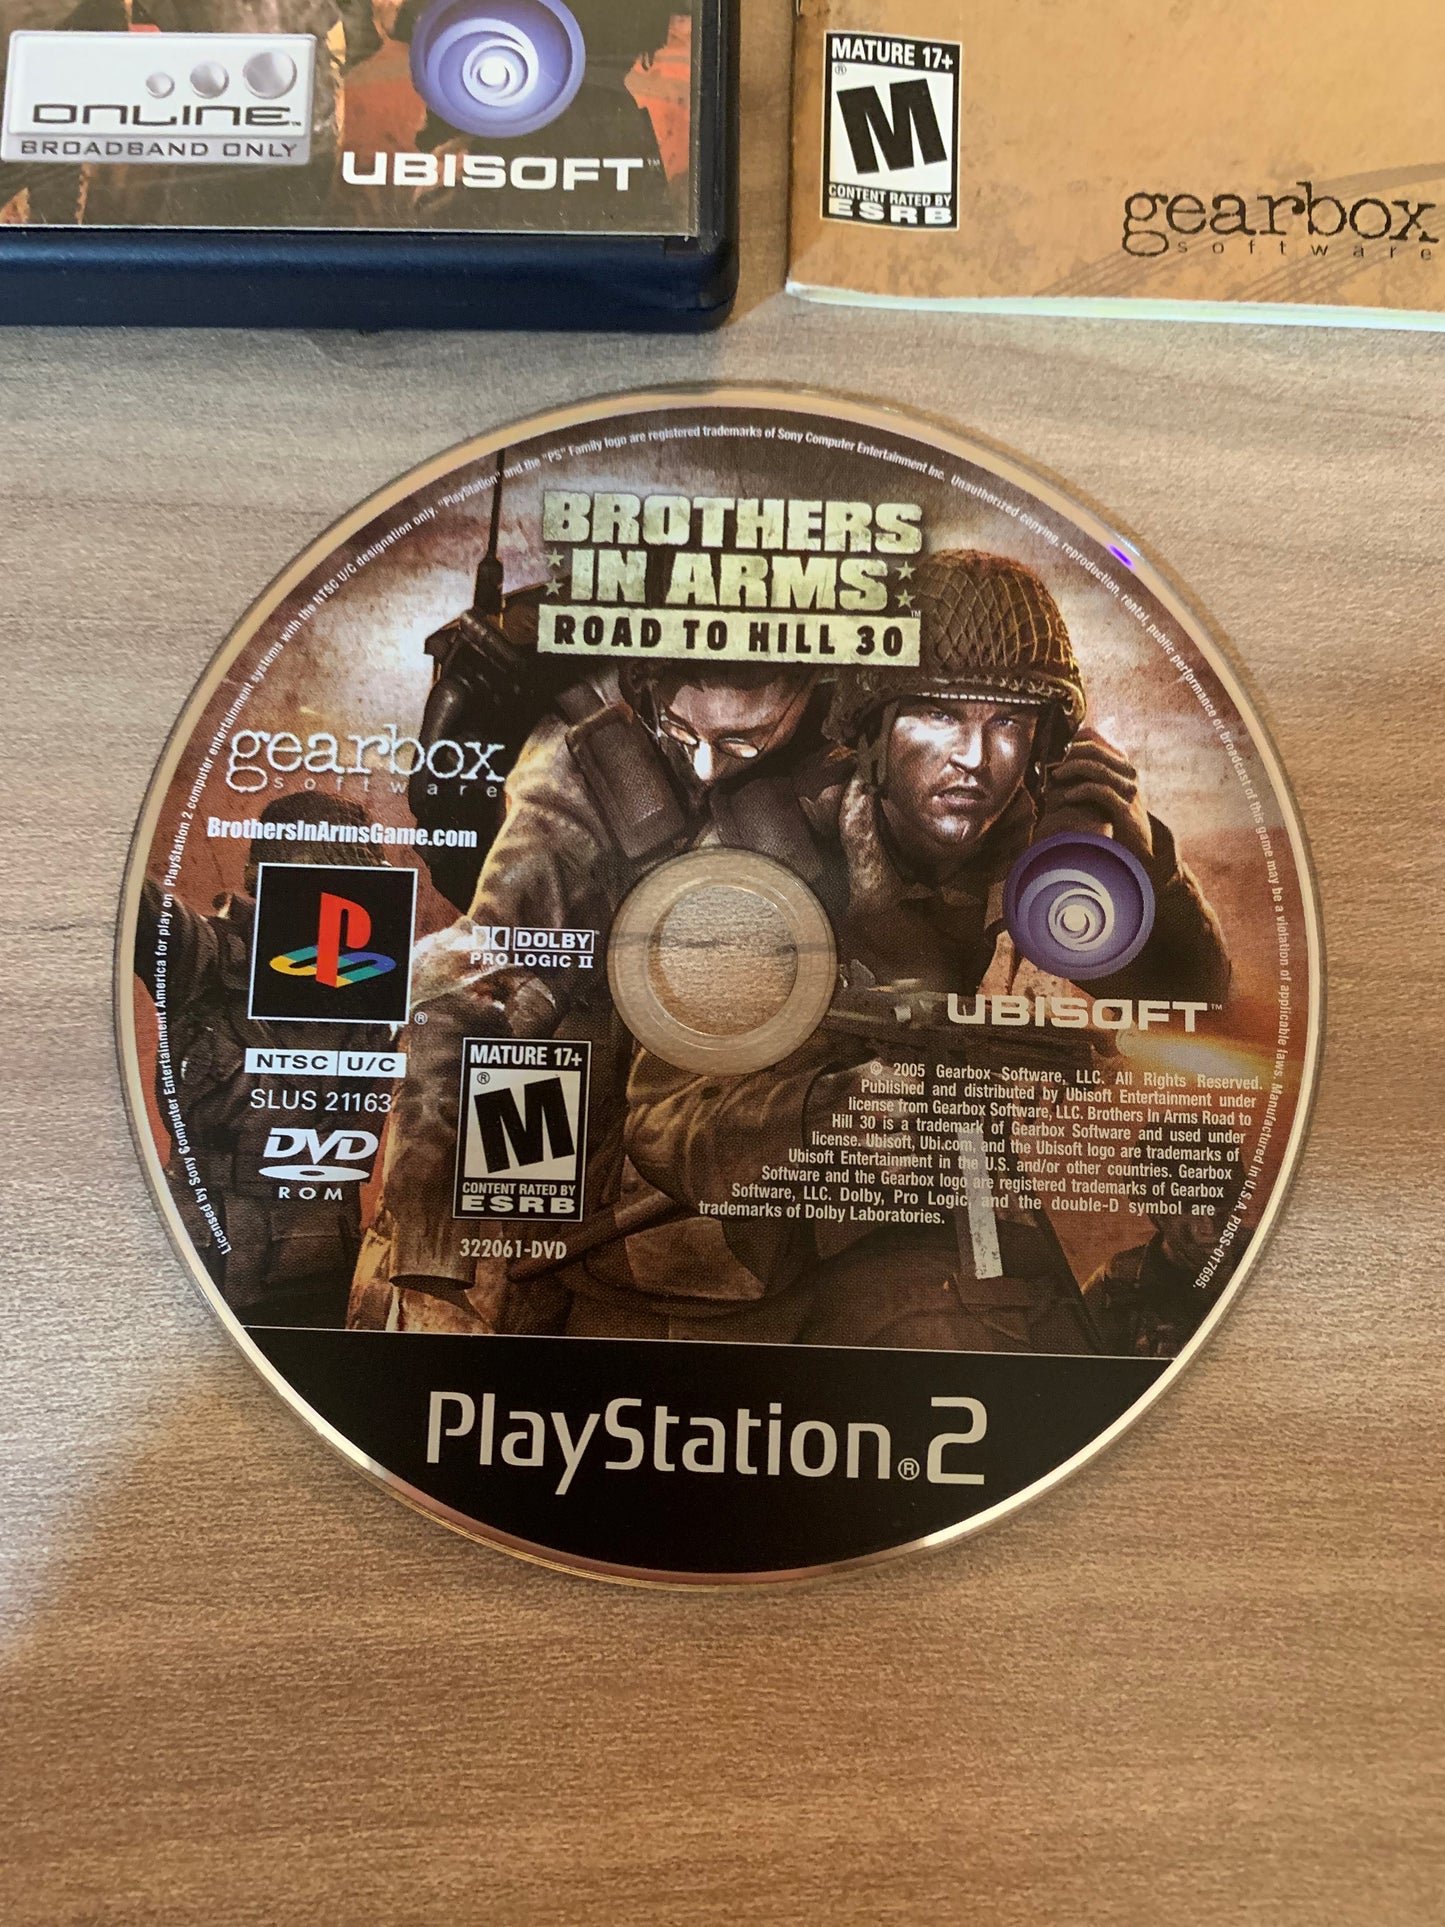 SONY PLAYSTATiON 2 [PS2] | BROTHERS iN ARMS ROAD TO HiLL 30